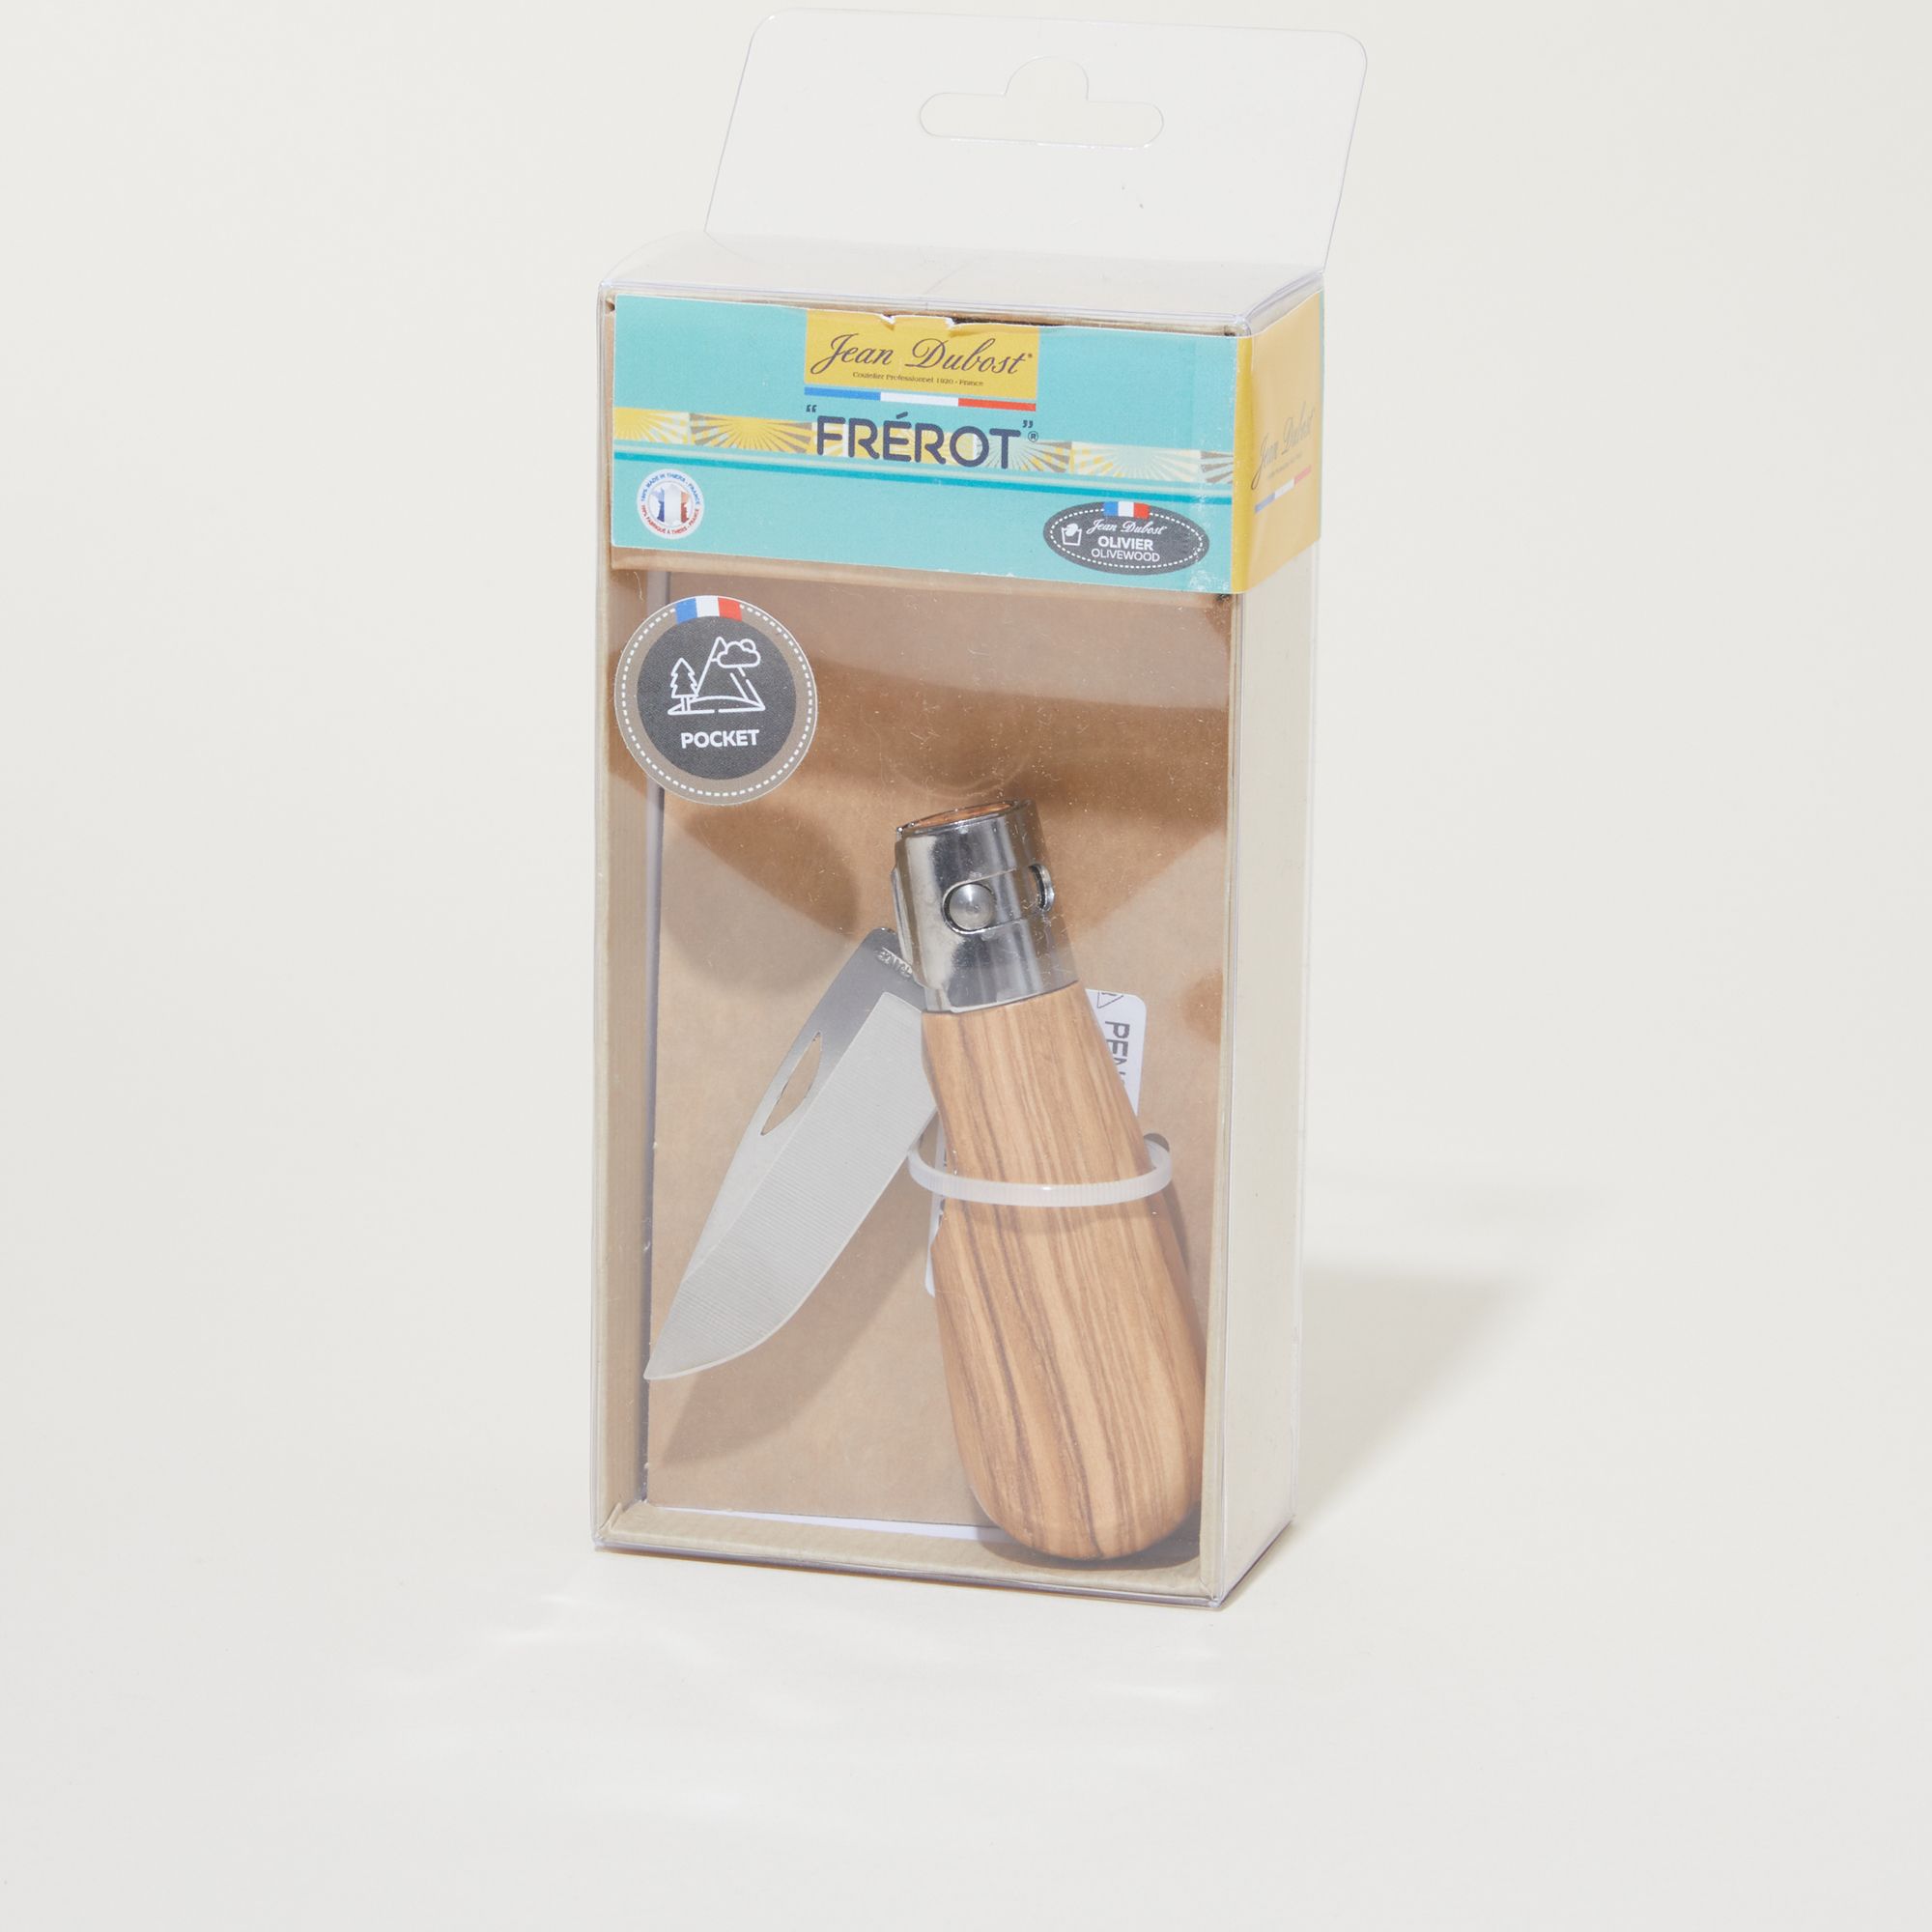 A partially open pocket knife in a clear box